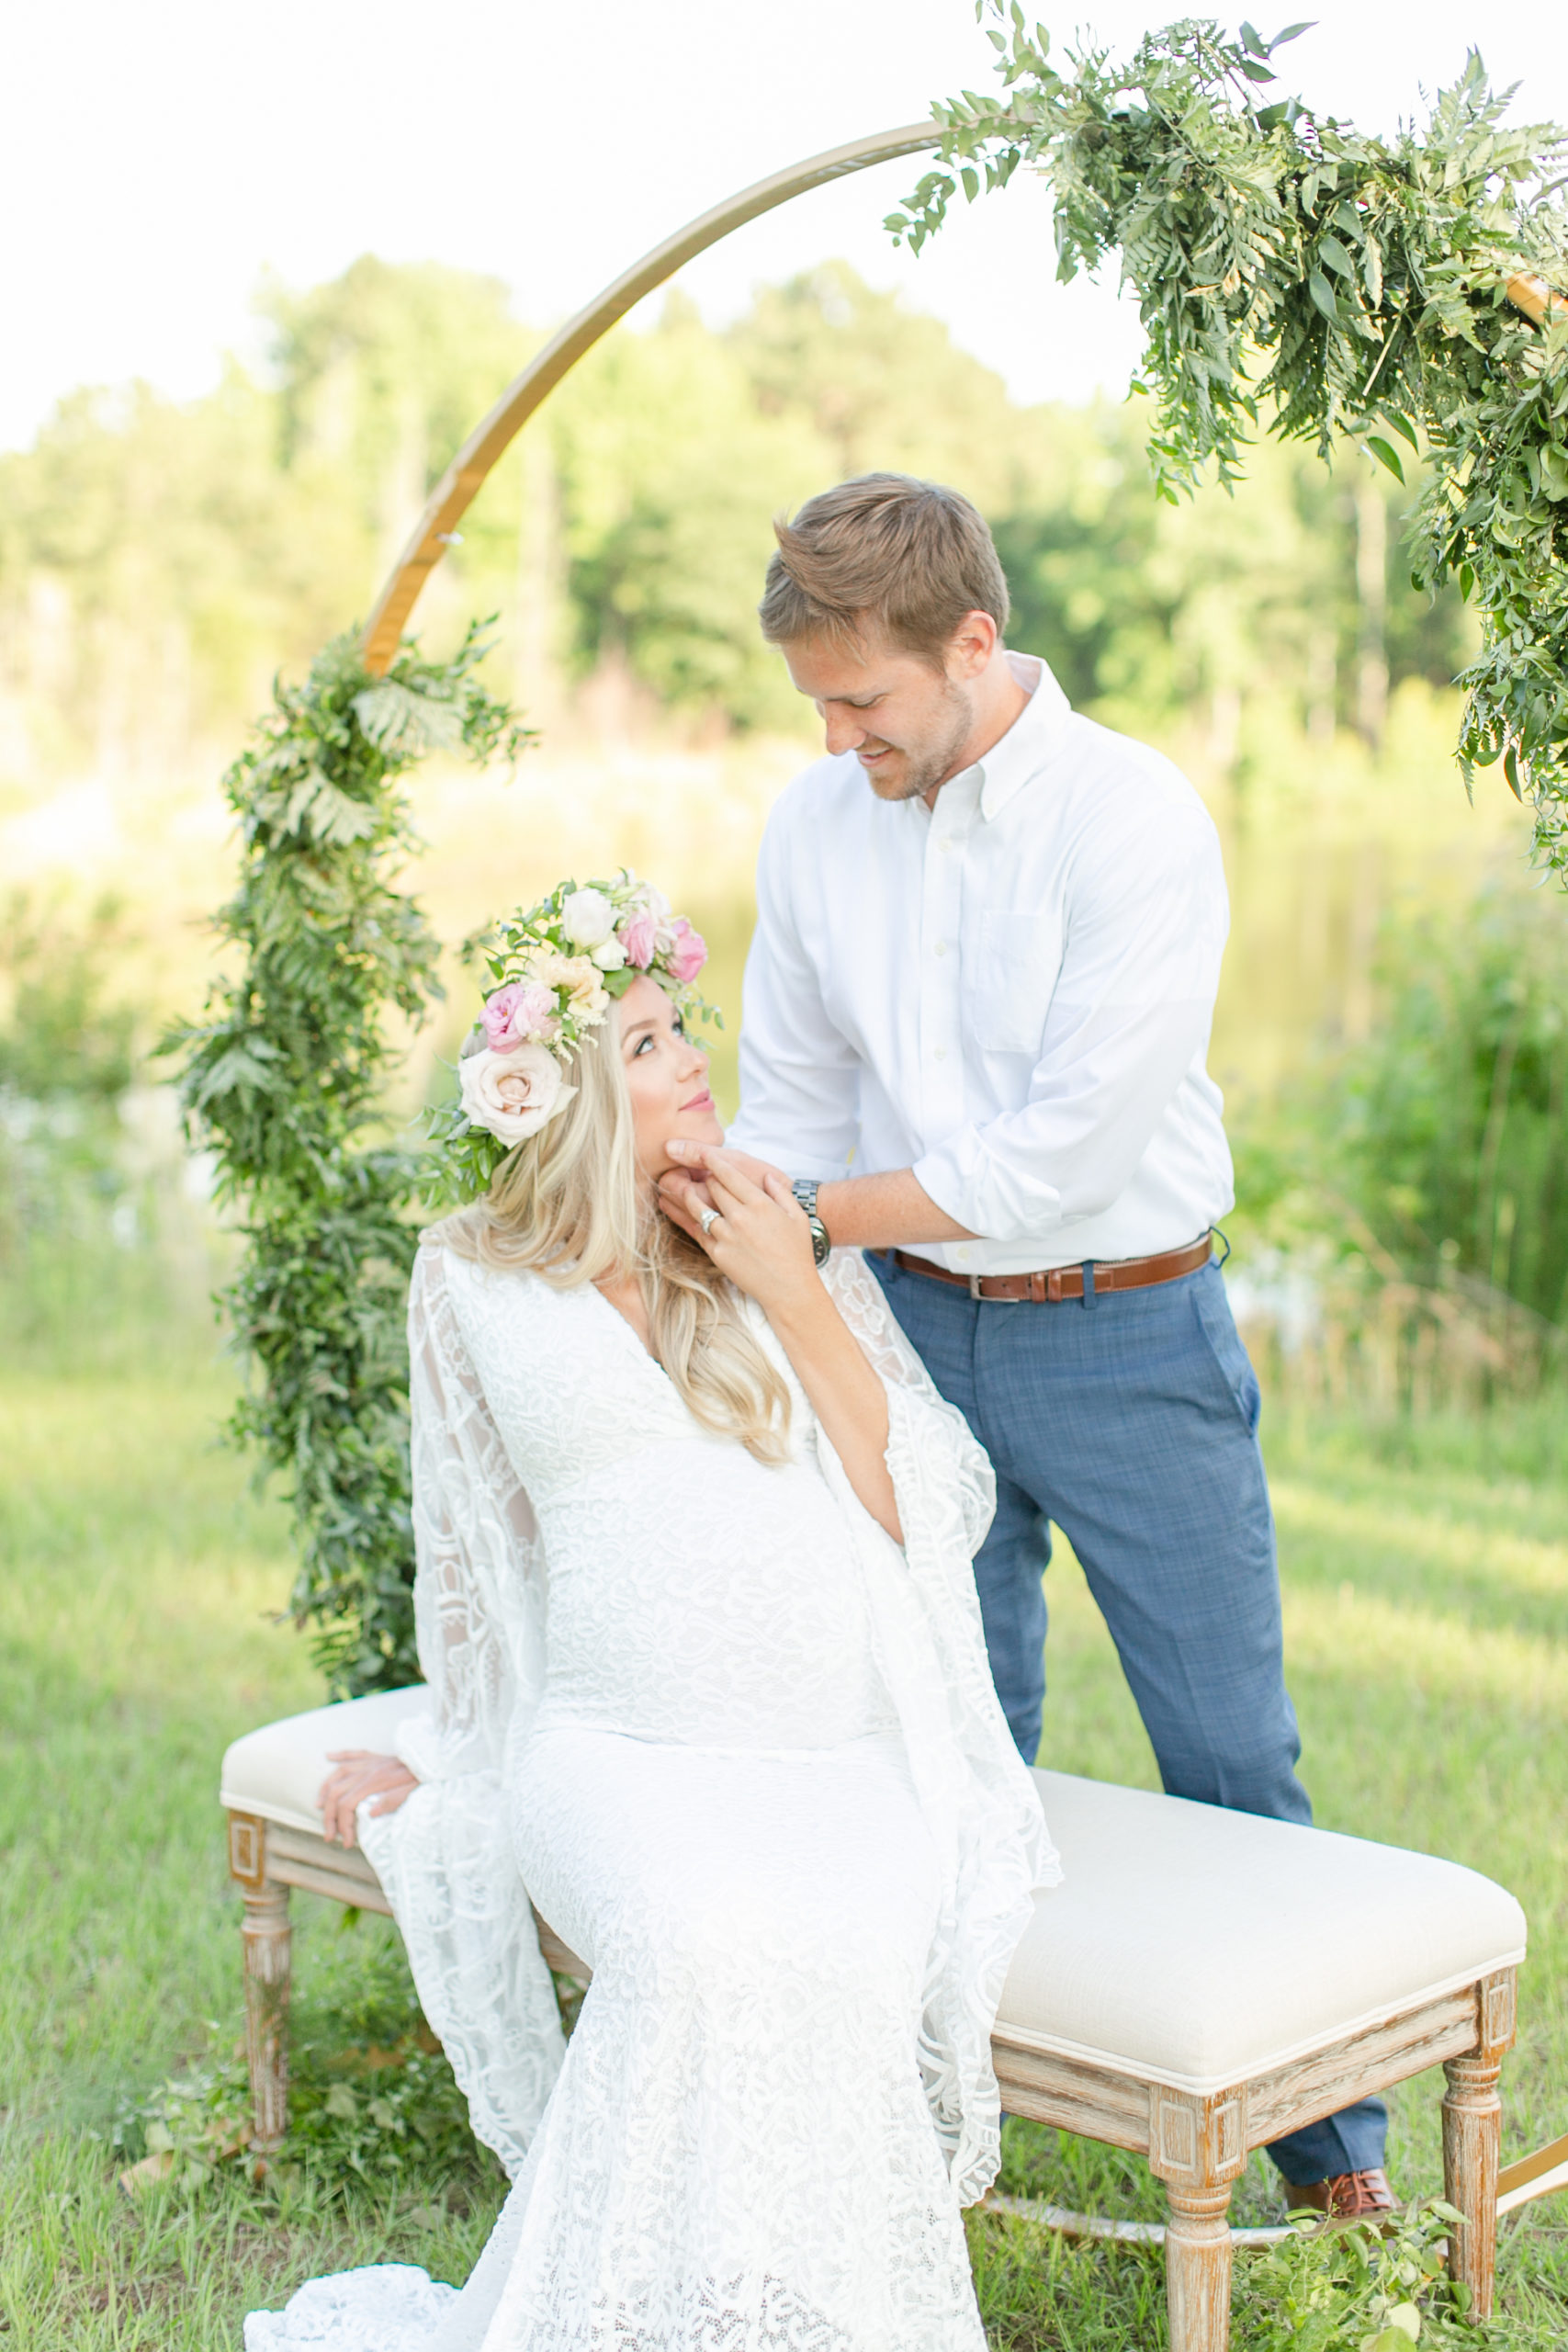 floral crown being worn during a maternity session